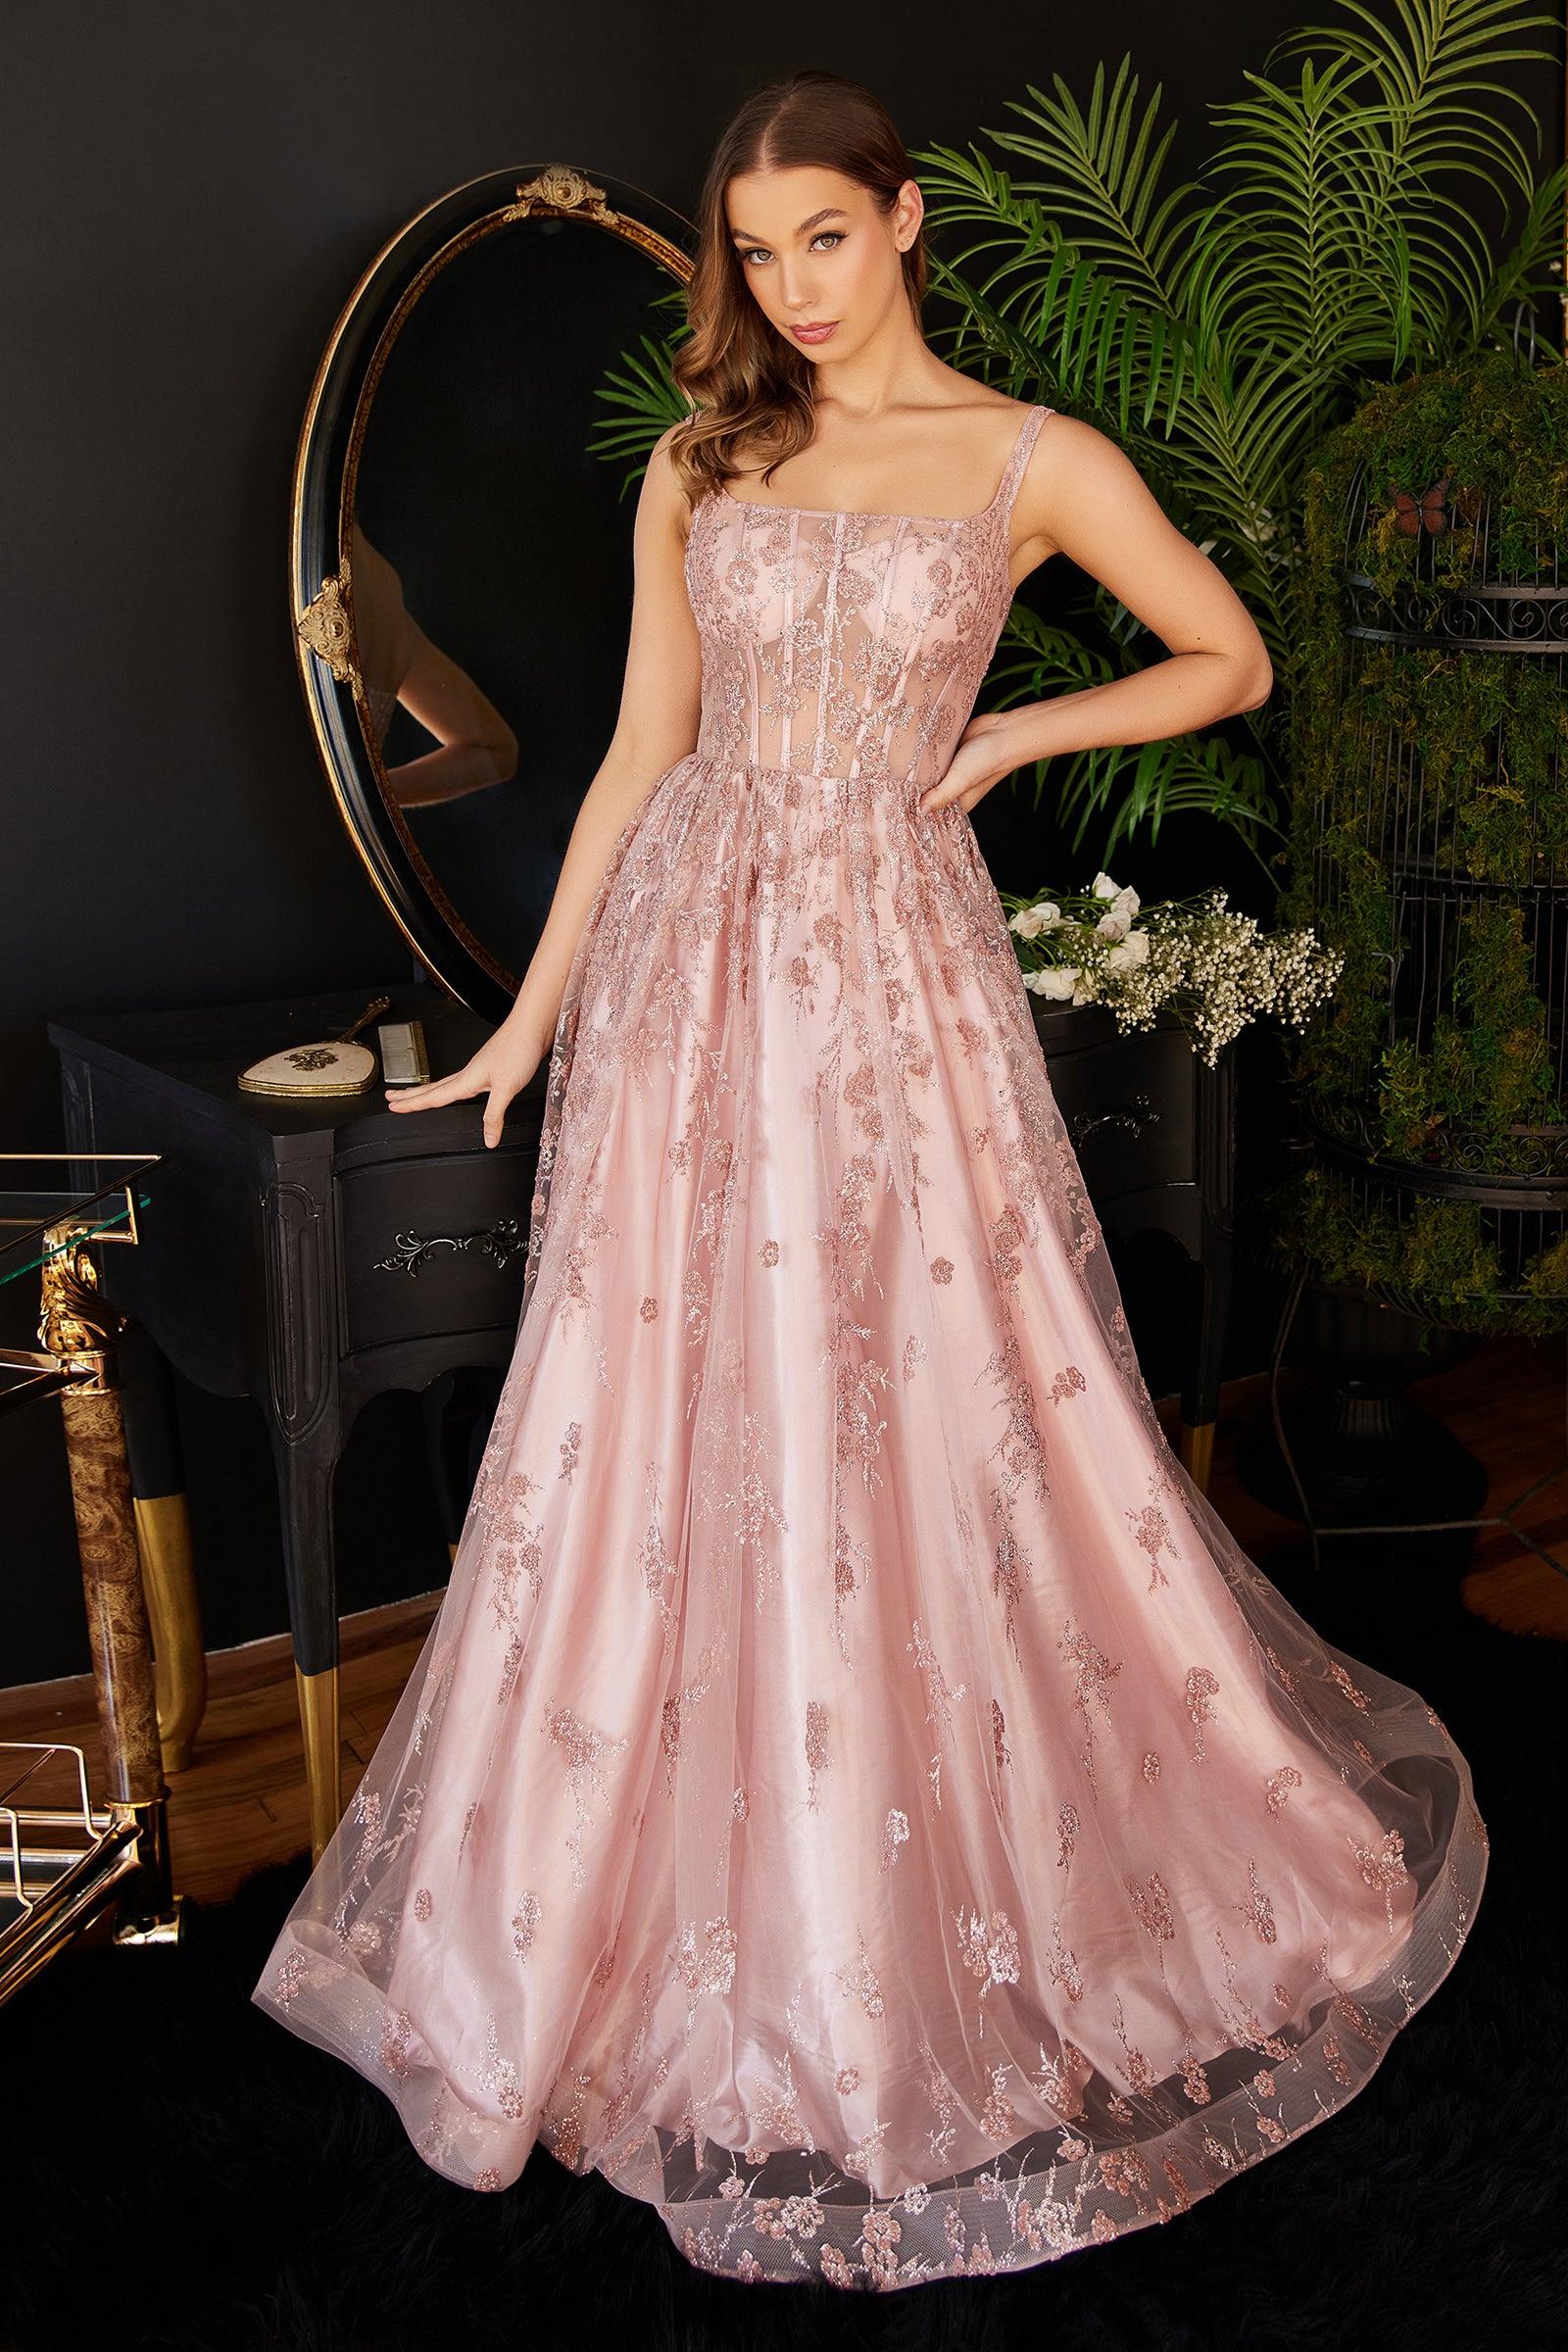 Custom made prom dress. The dress is rose gold and champagne. Size small -  Dresses